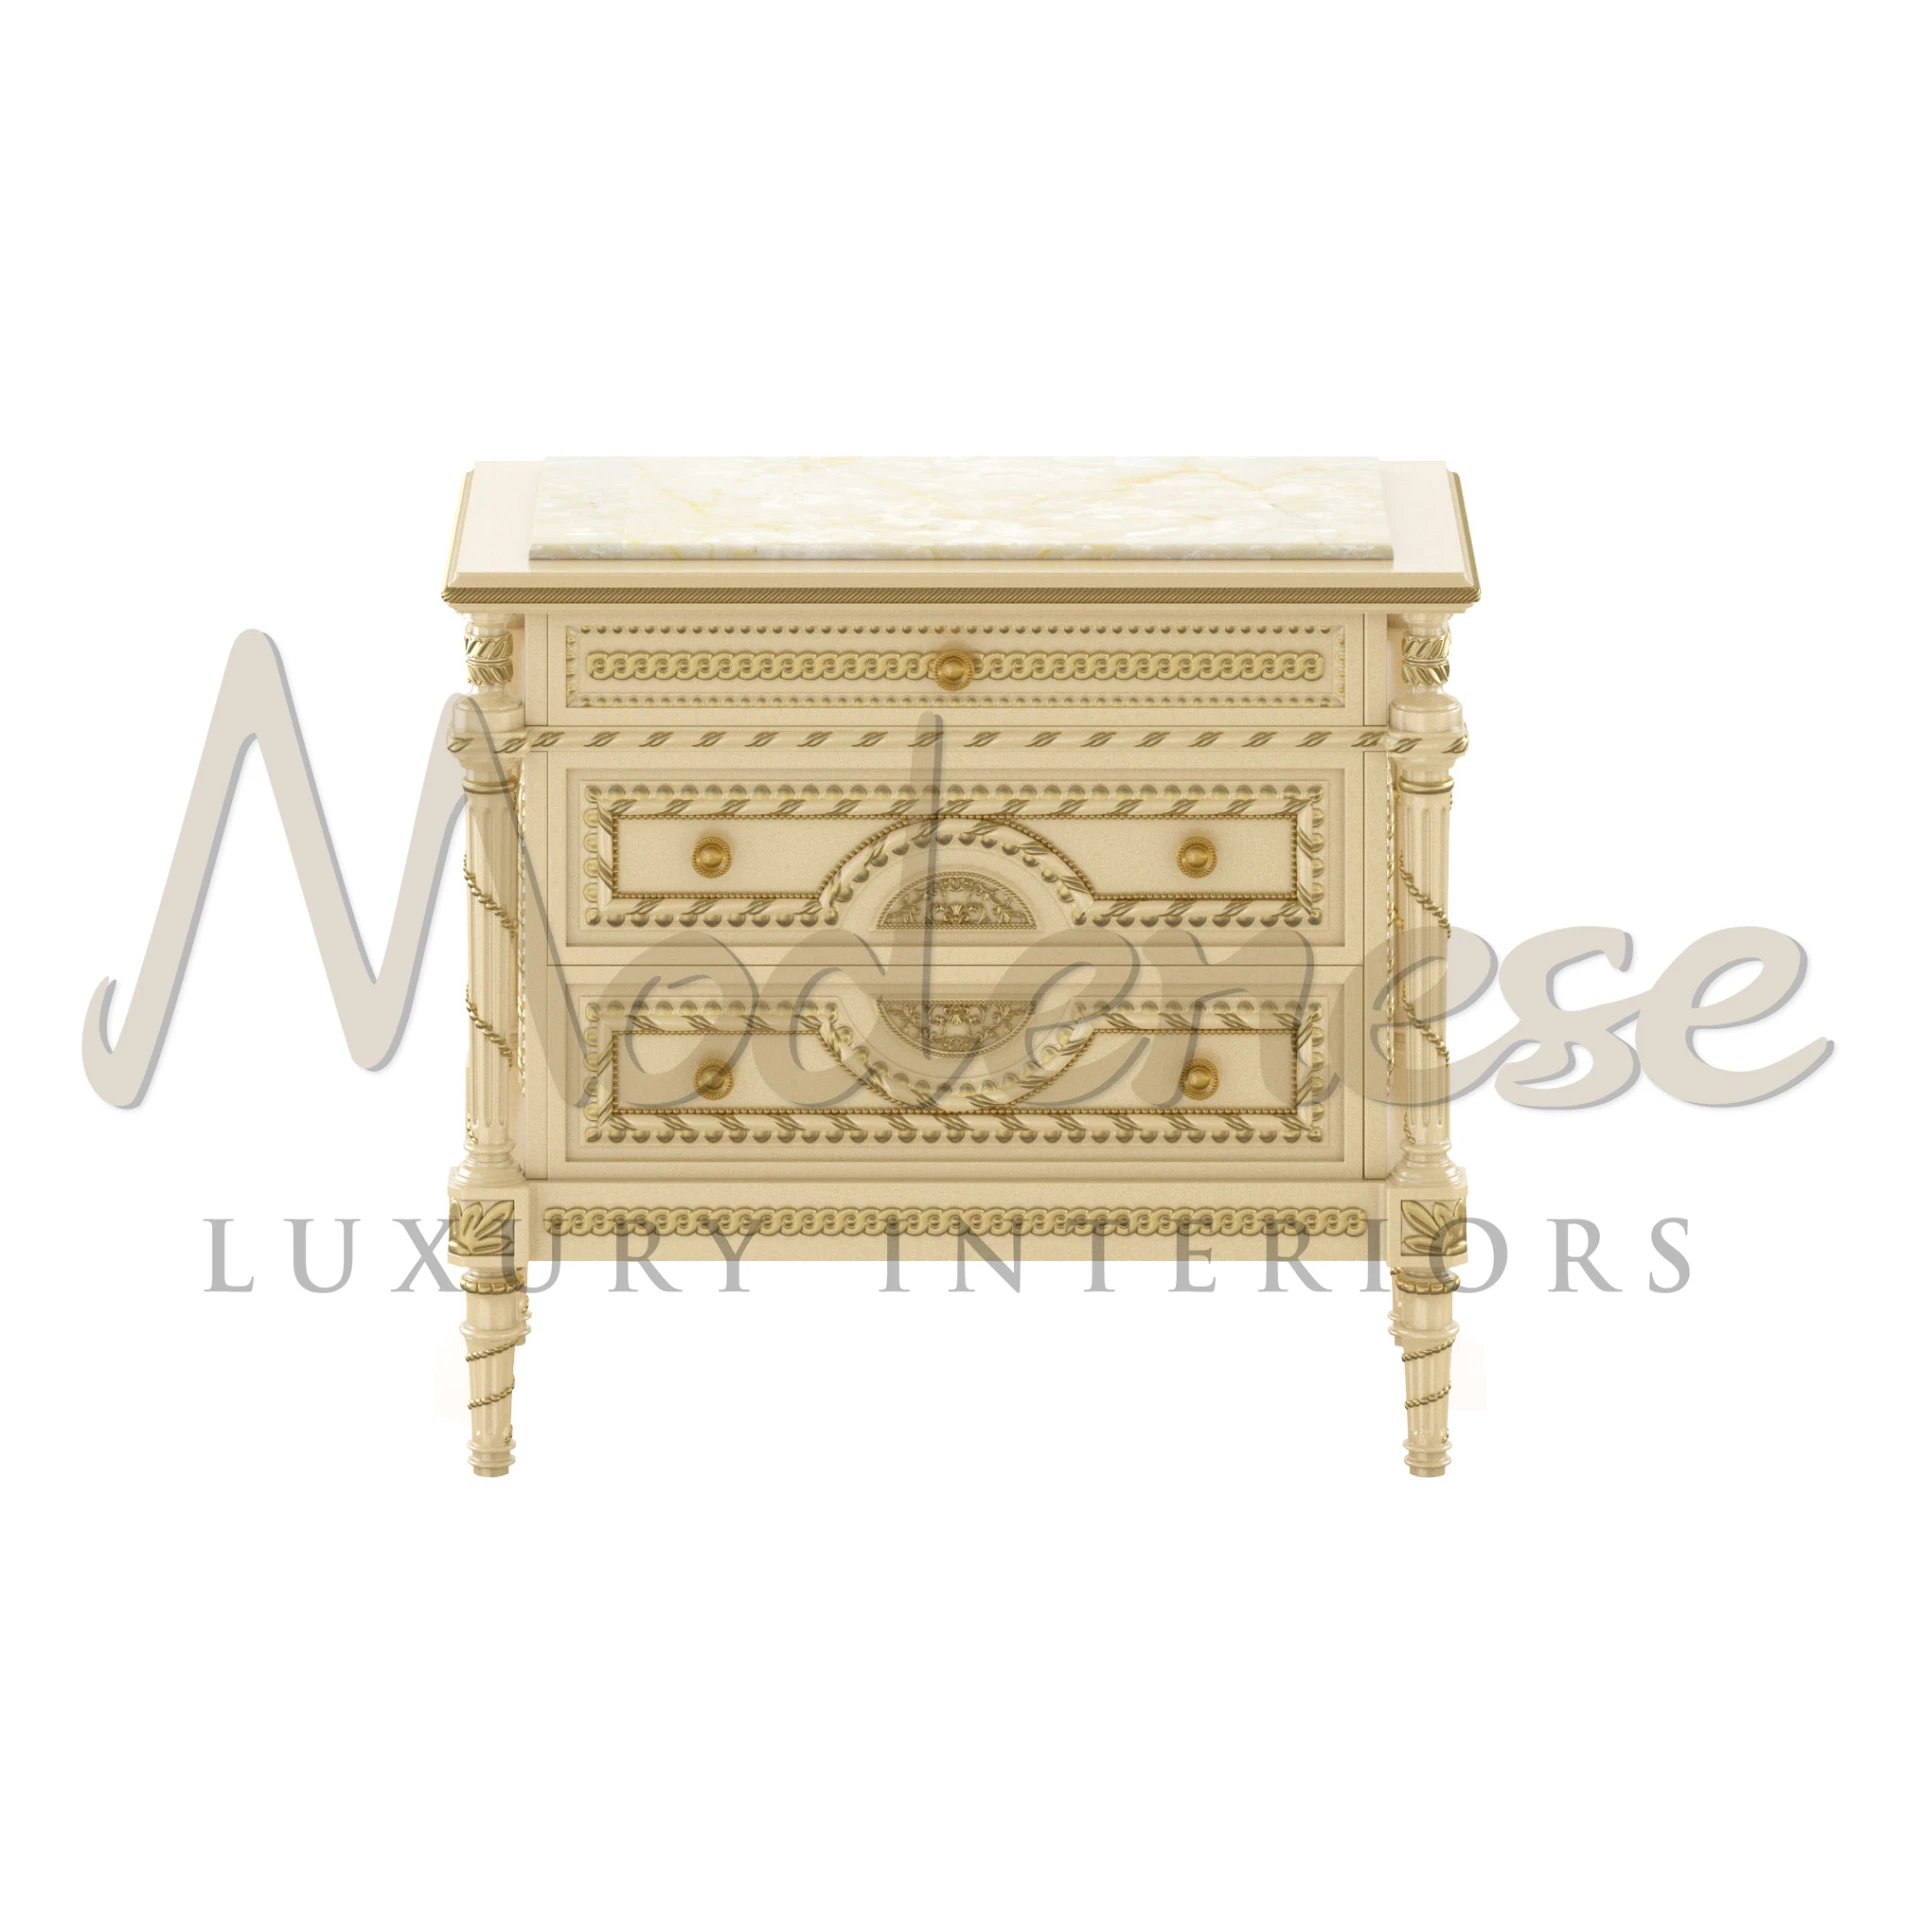 
An ornate luxury cream-colored nightstand with marble top, detailed carvings, and brass drawer pulls from Modenese Furniture Manufacturer made in Italy.